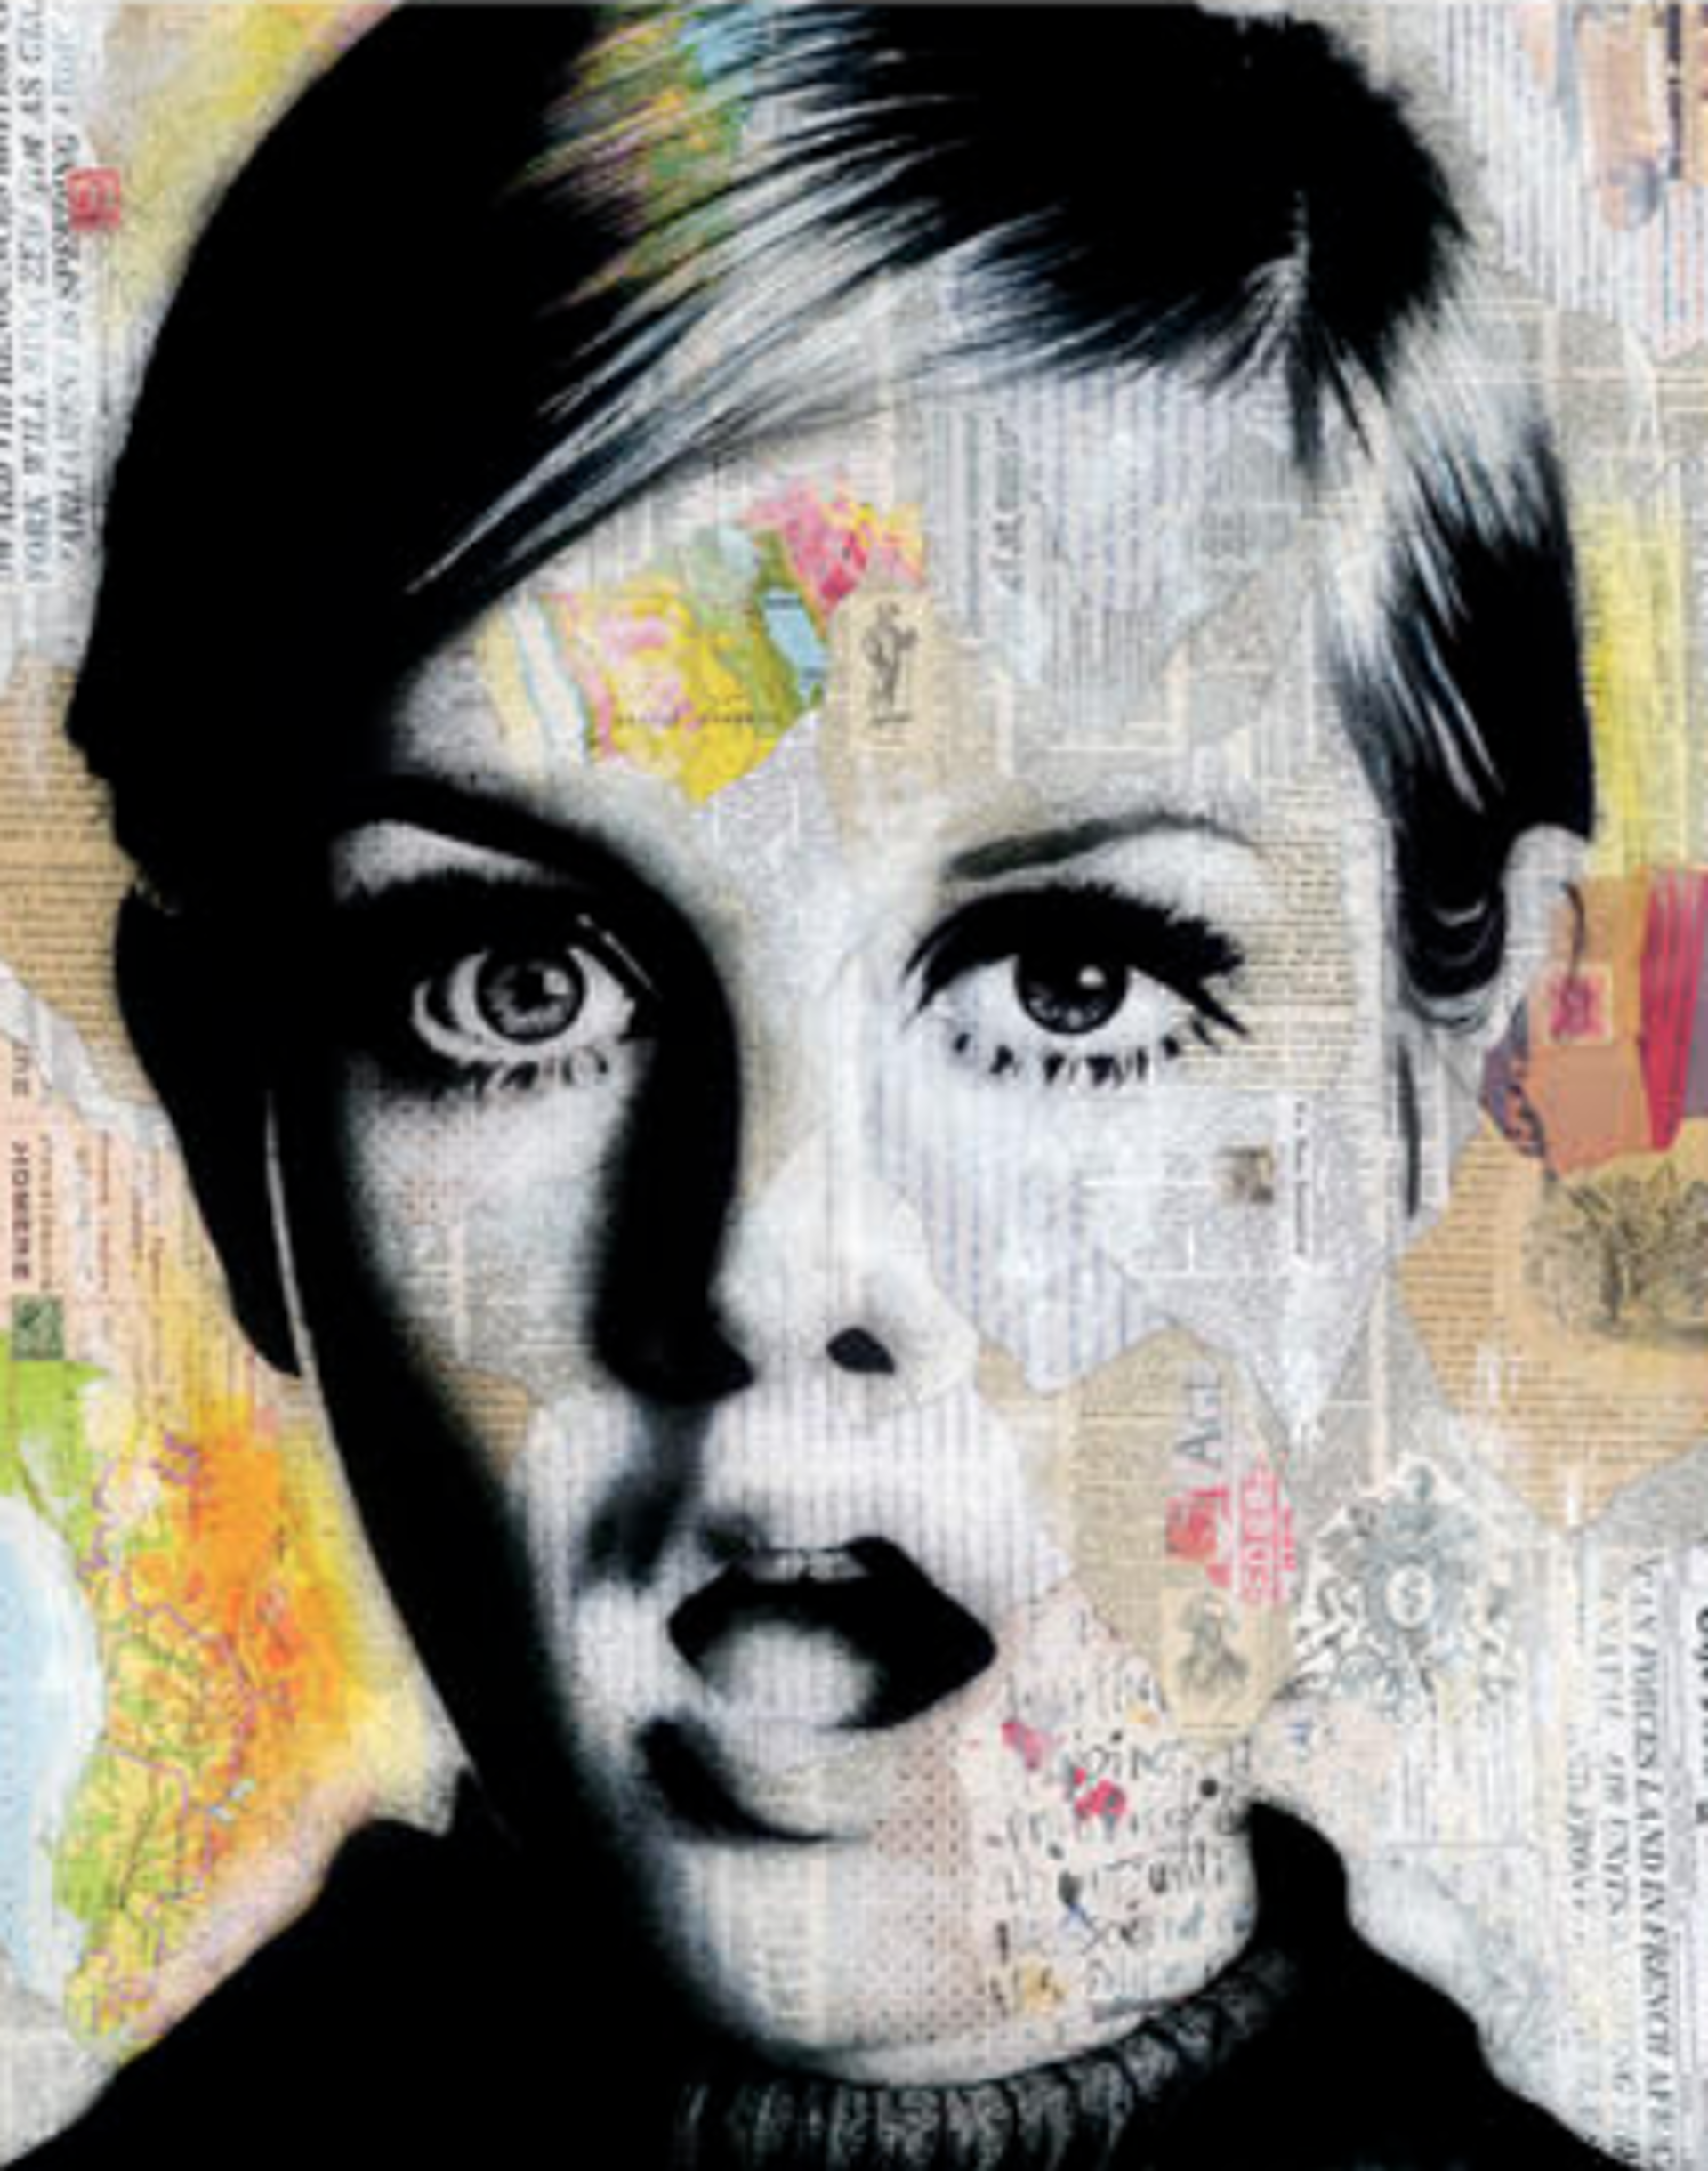 Twiggy by Andre Monet